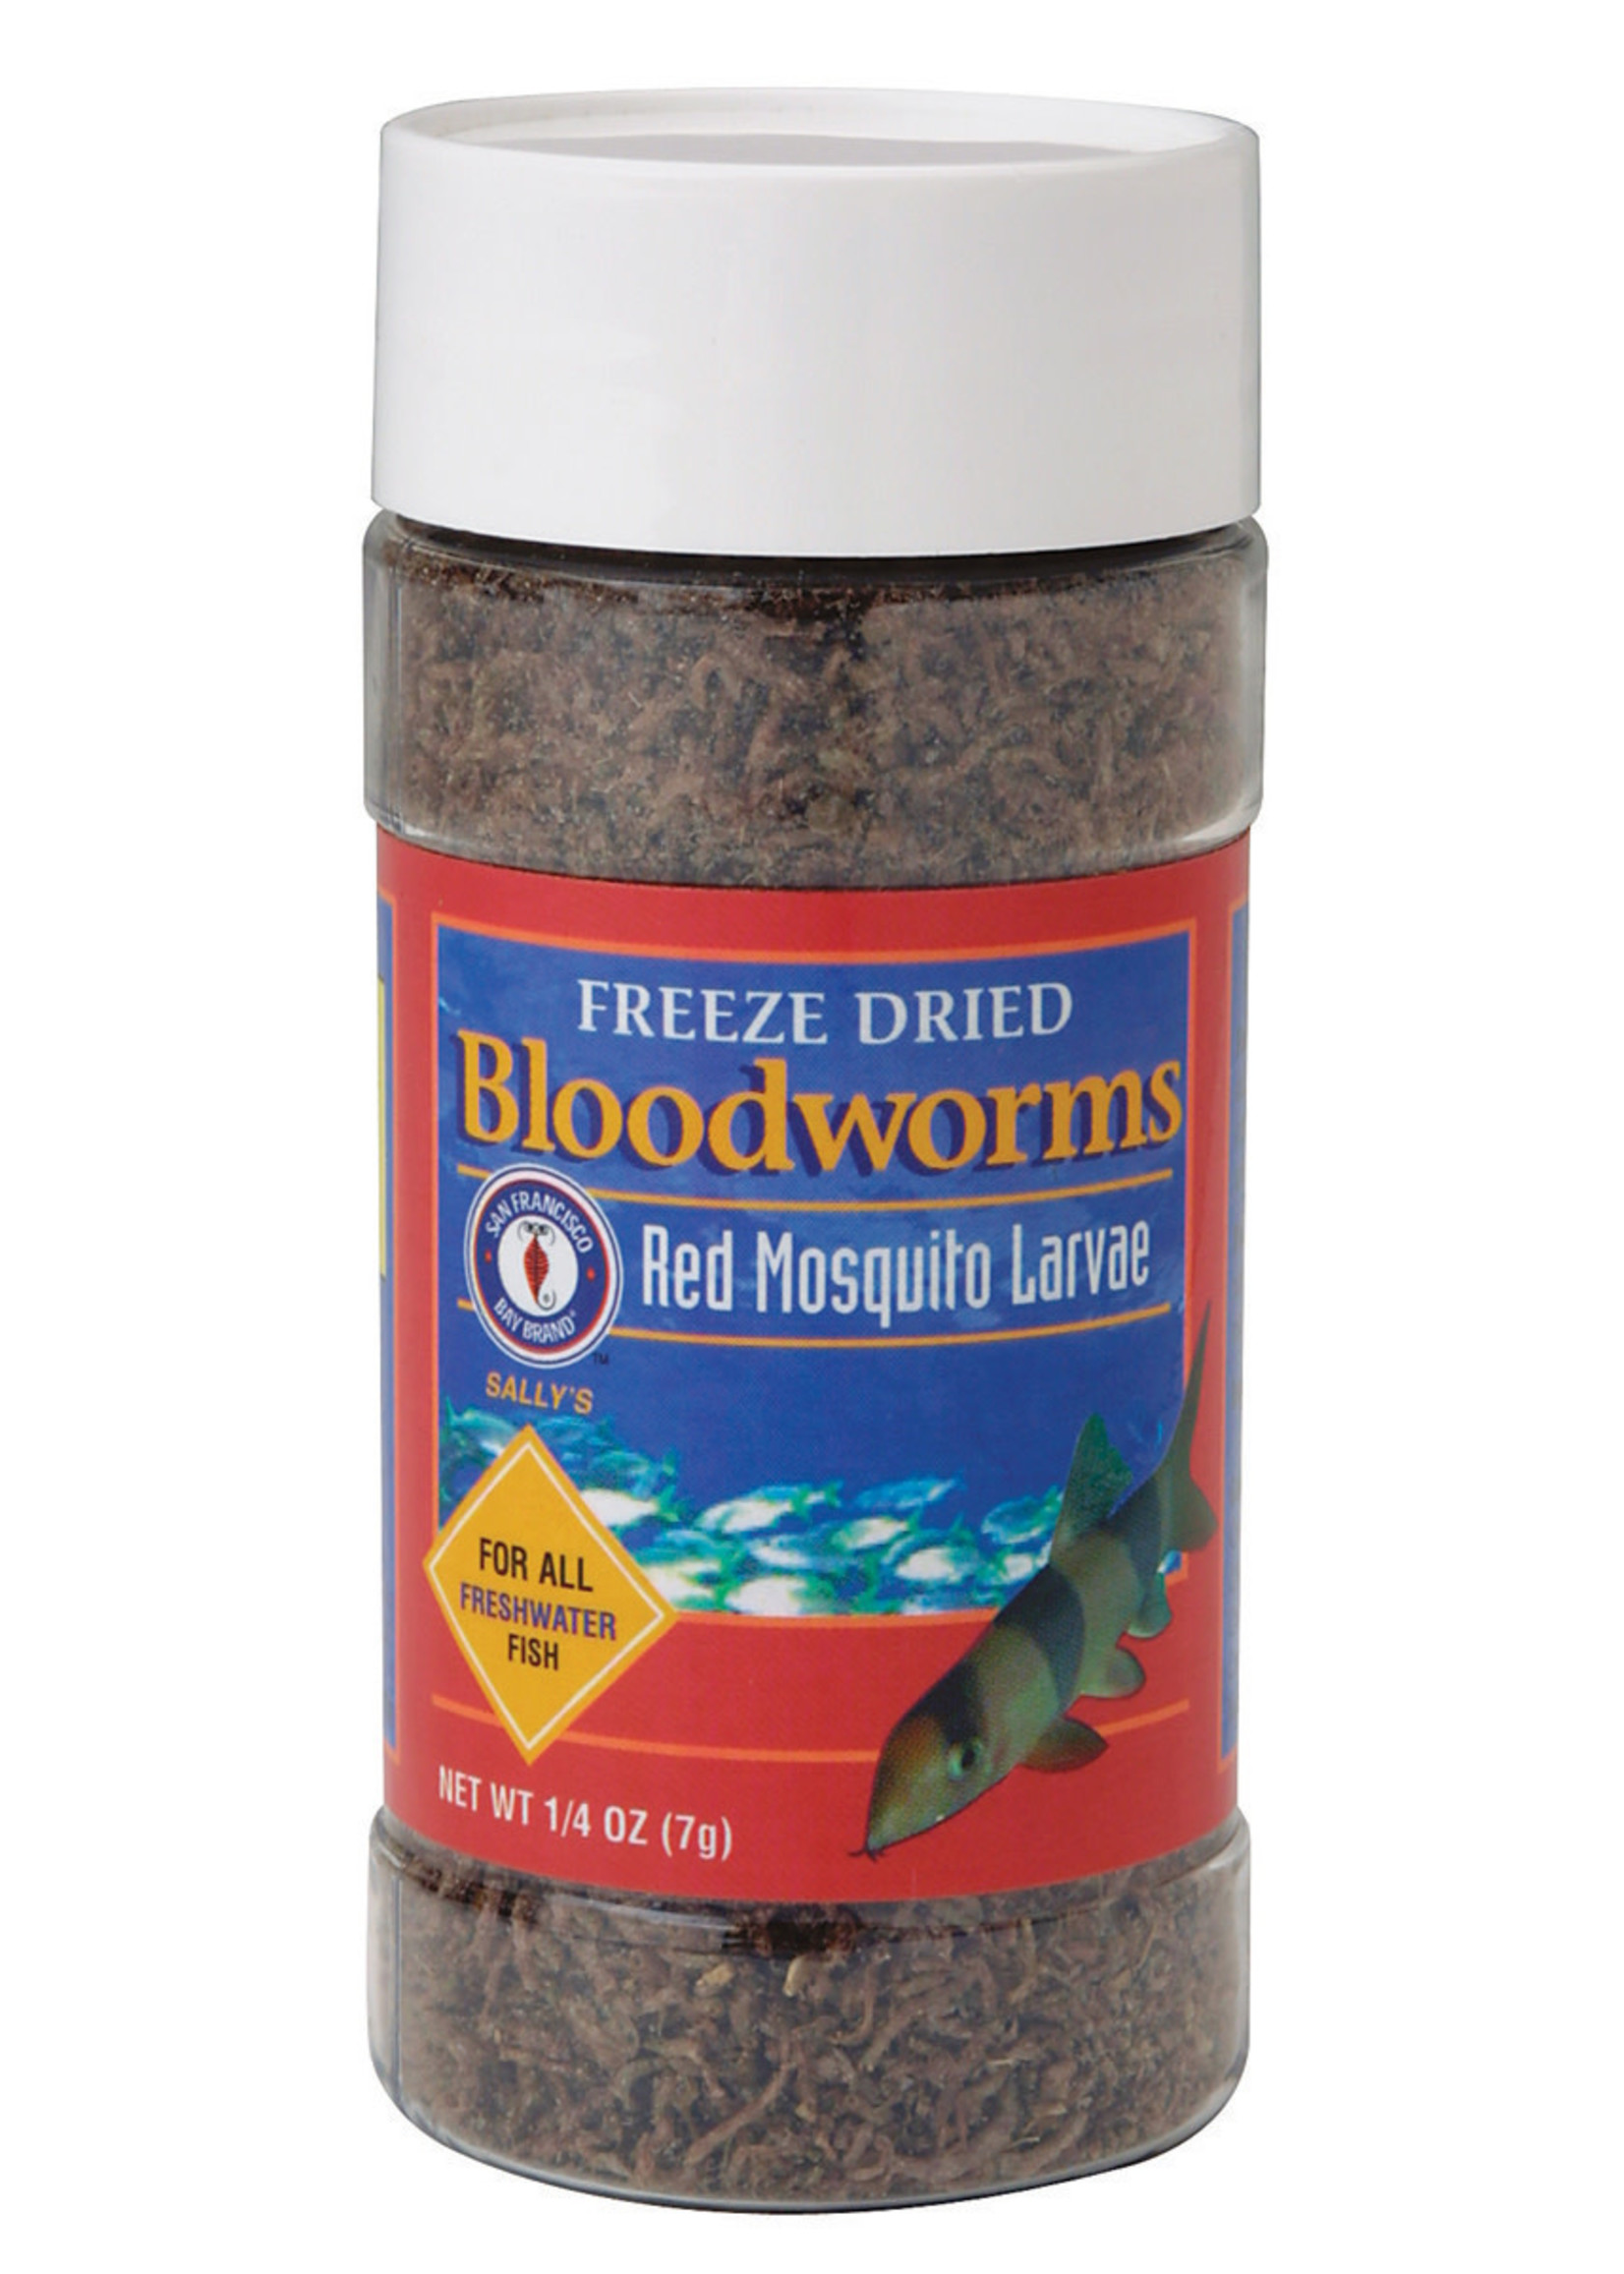 San Francisco Bay Brand© San Francisco Bay Brand© Freeze Dried Bloodworms 7g